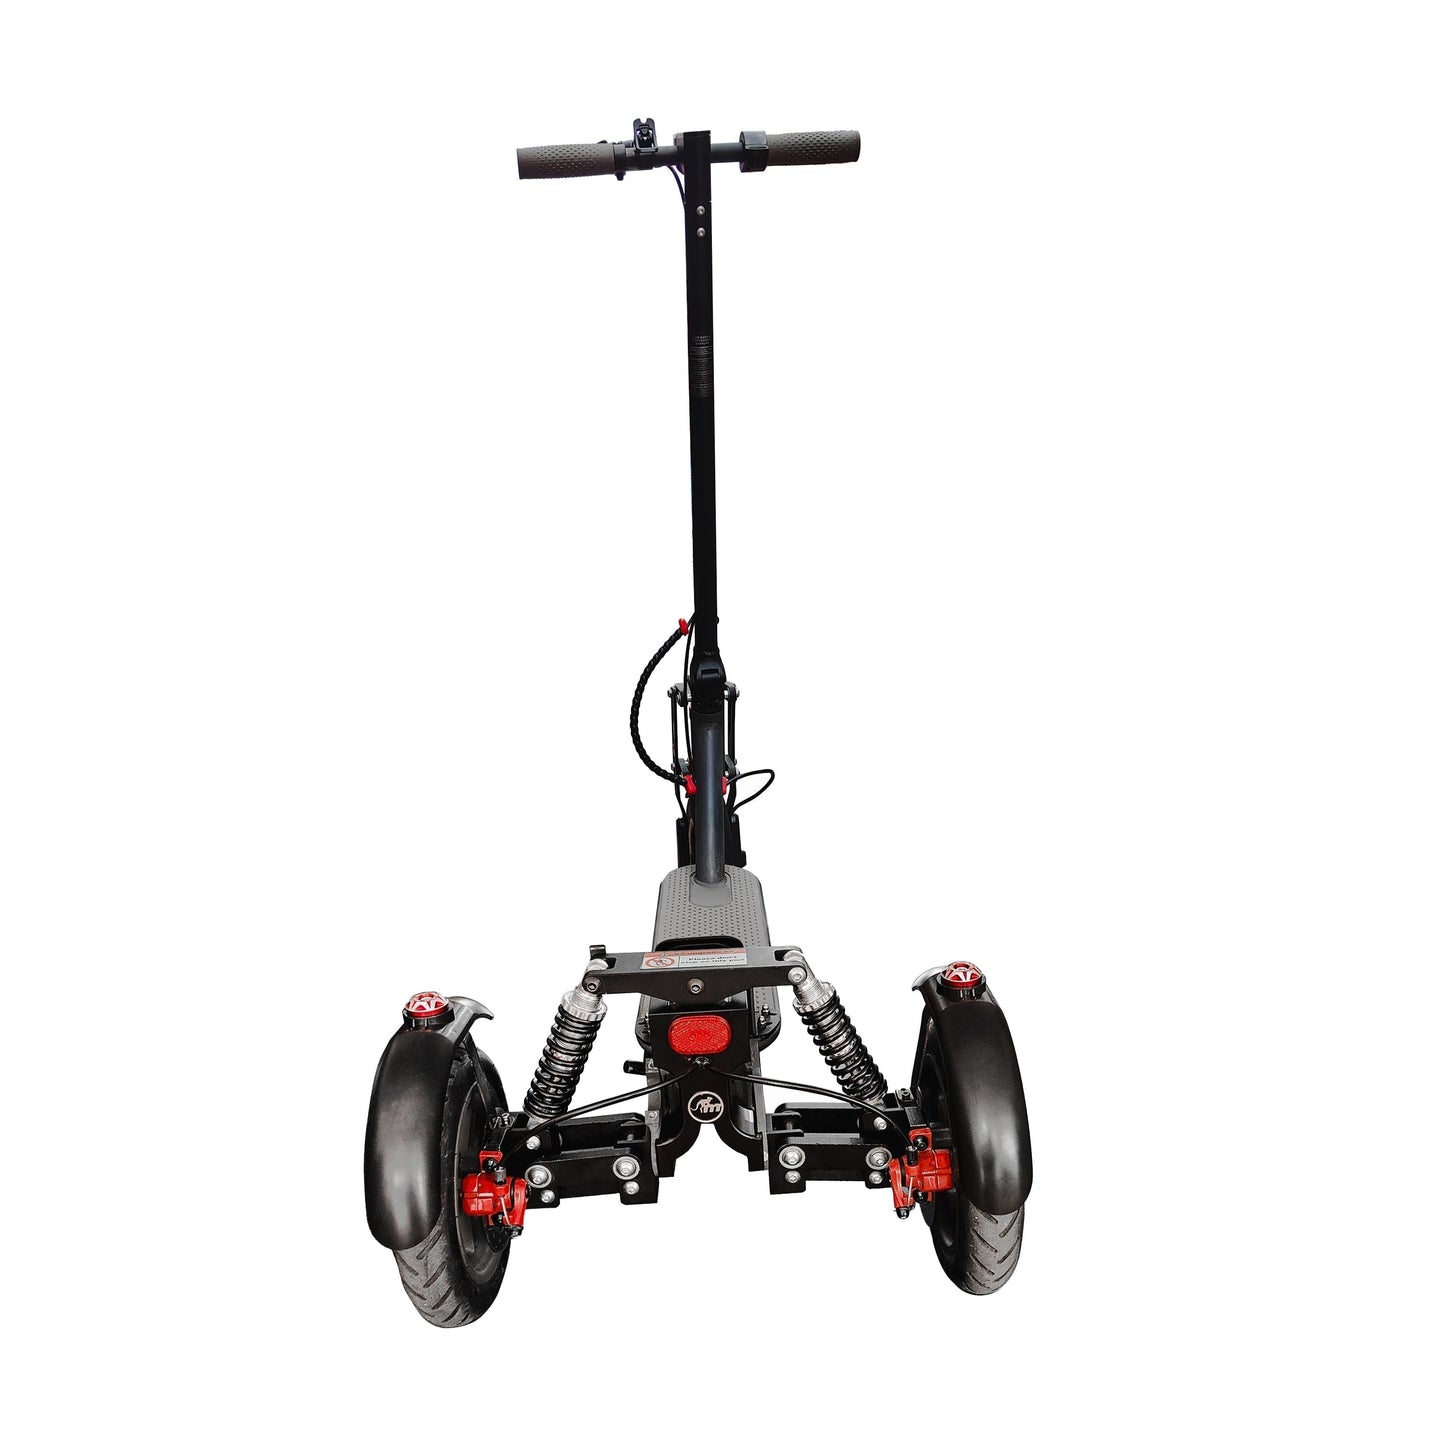 Monorim X3 upgrade kit to be Three wheels special for ks4 pro Scooter